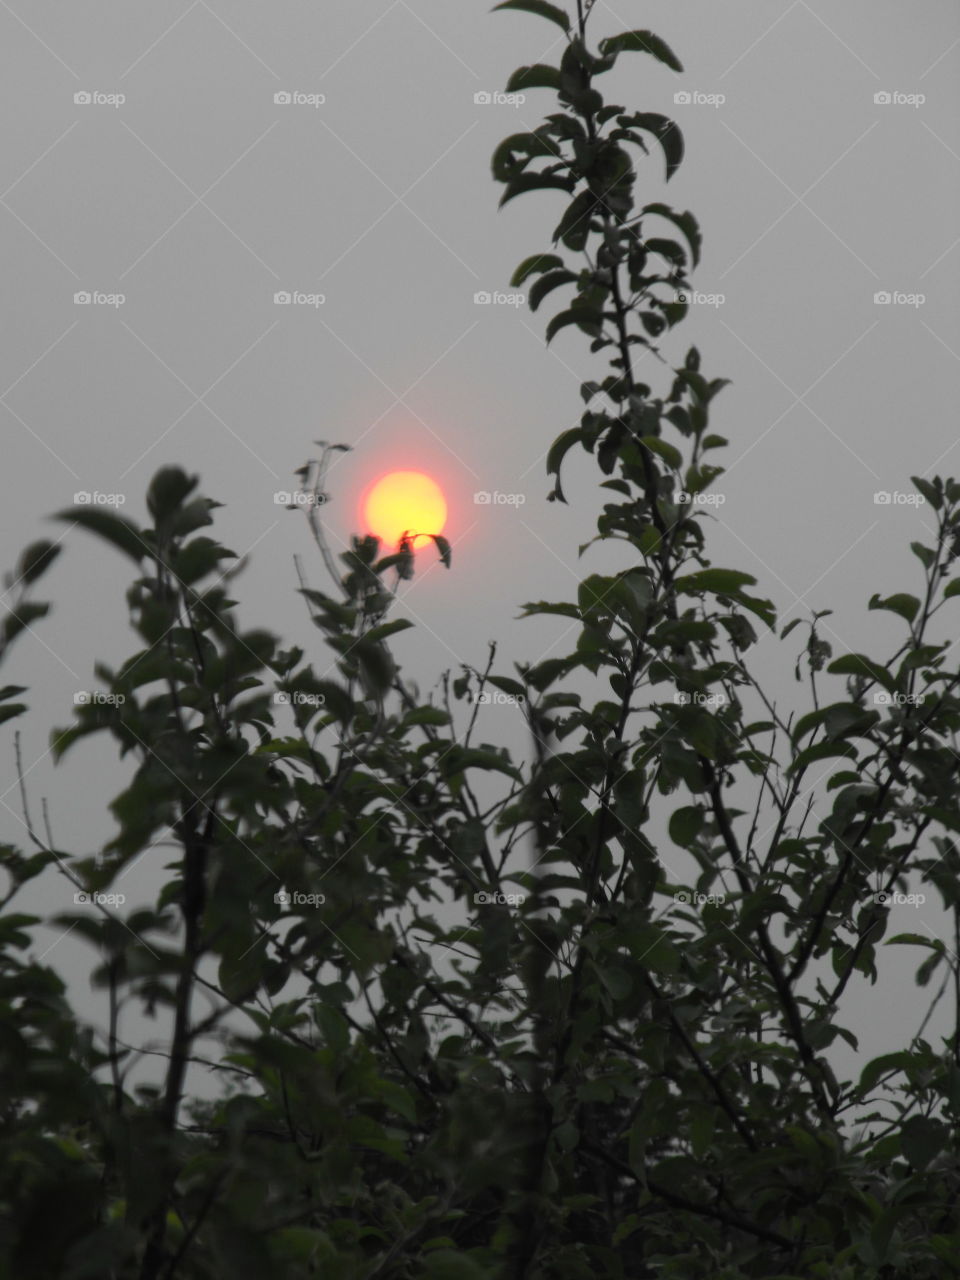 Sun in the time of forest fires